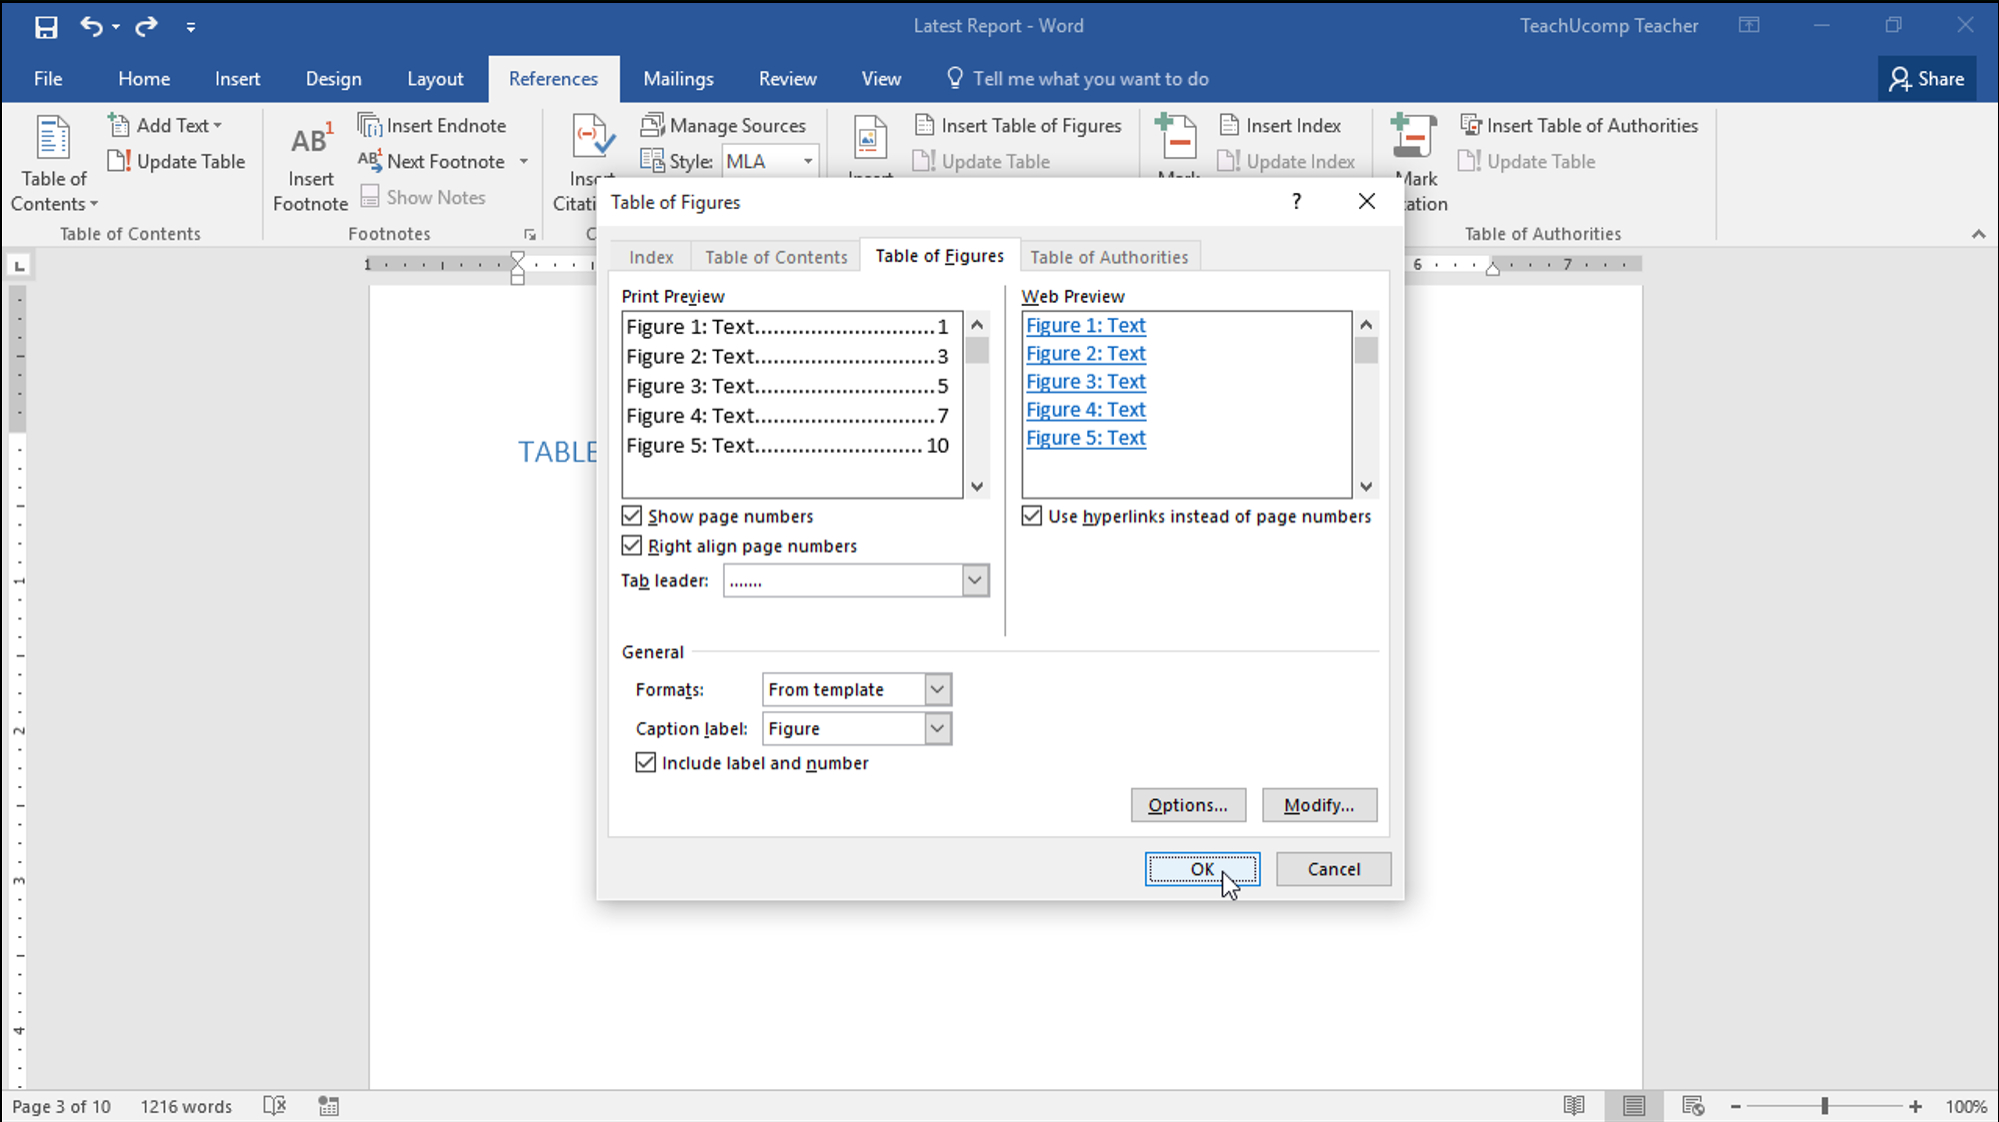 Insert A Table Of Figures In Word – Teachucomp, Inc. Regarding How To Insert Template In Word